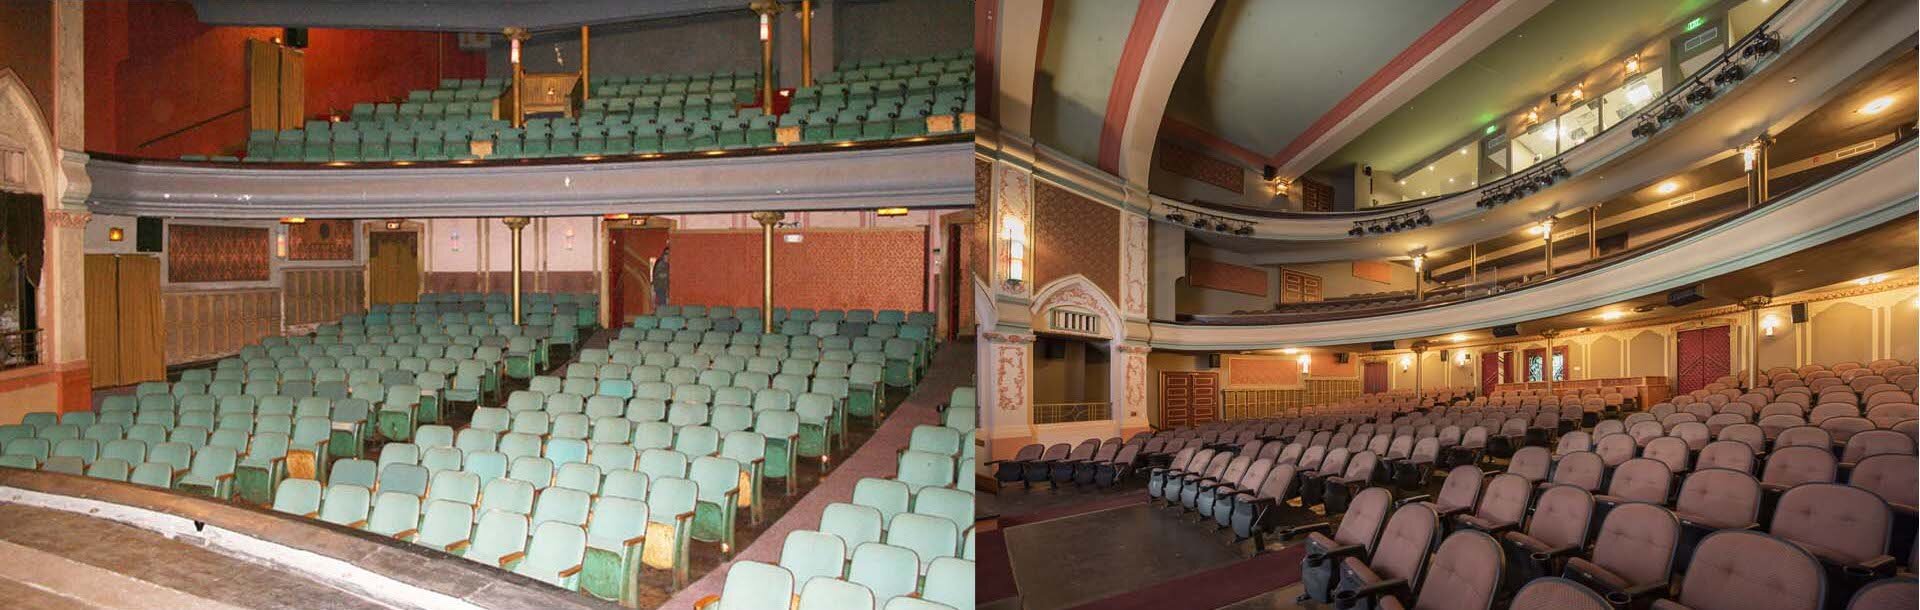 Inside the Eagles Theatre before and after renovations.